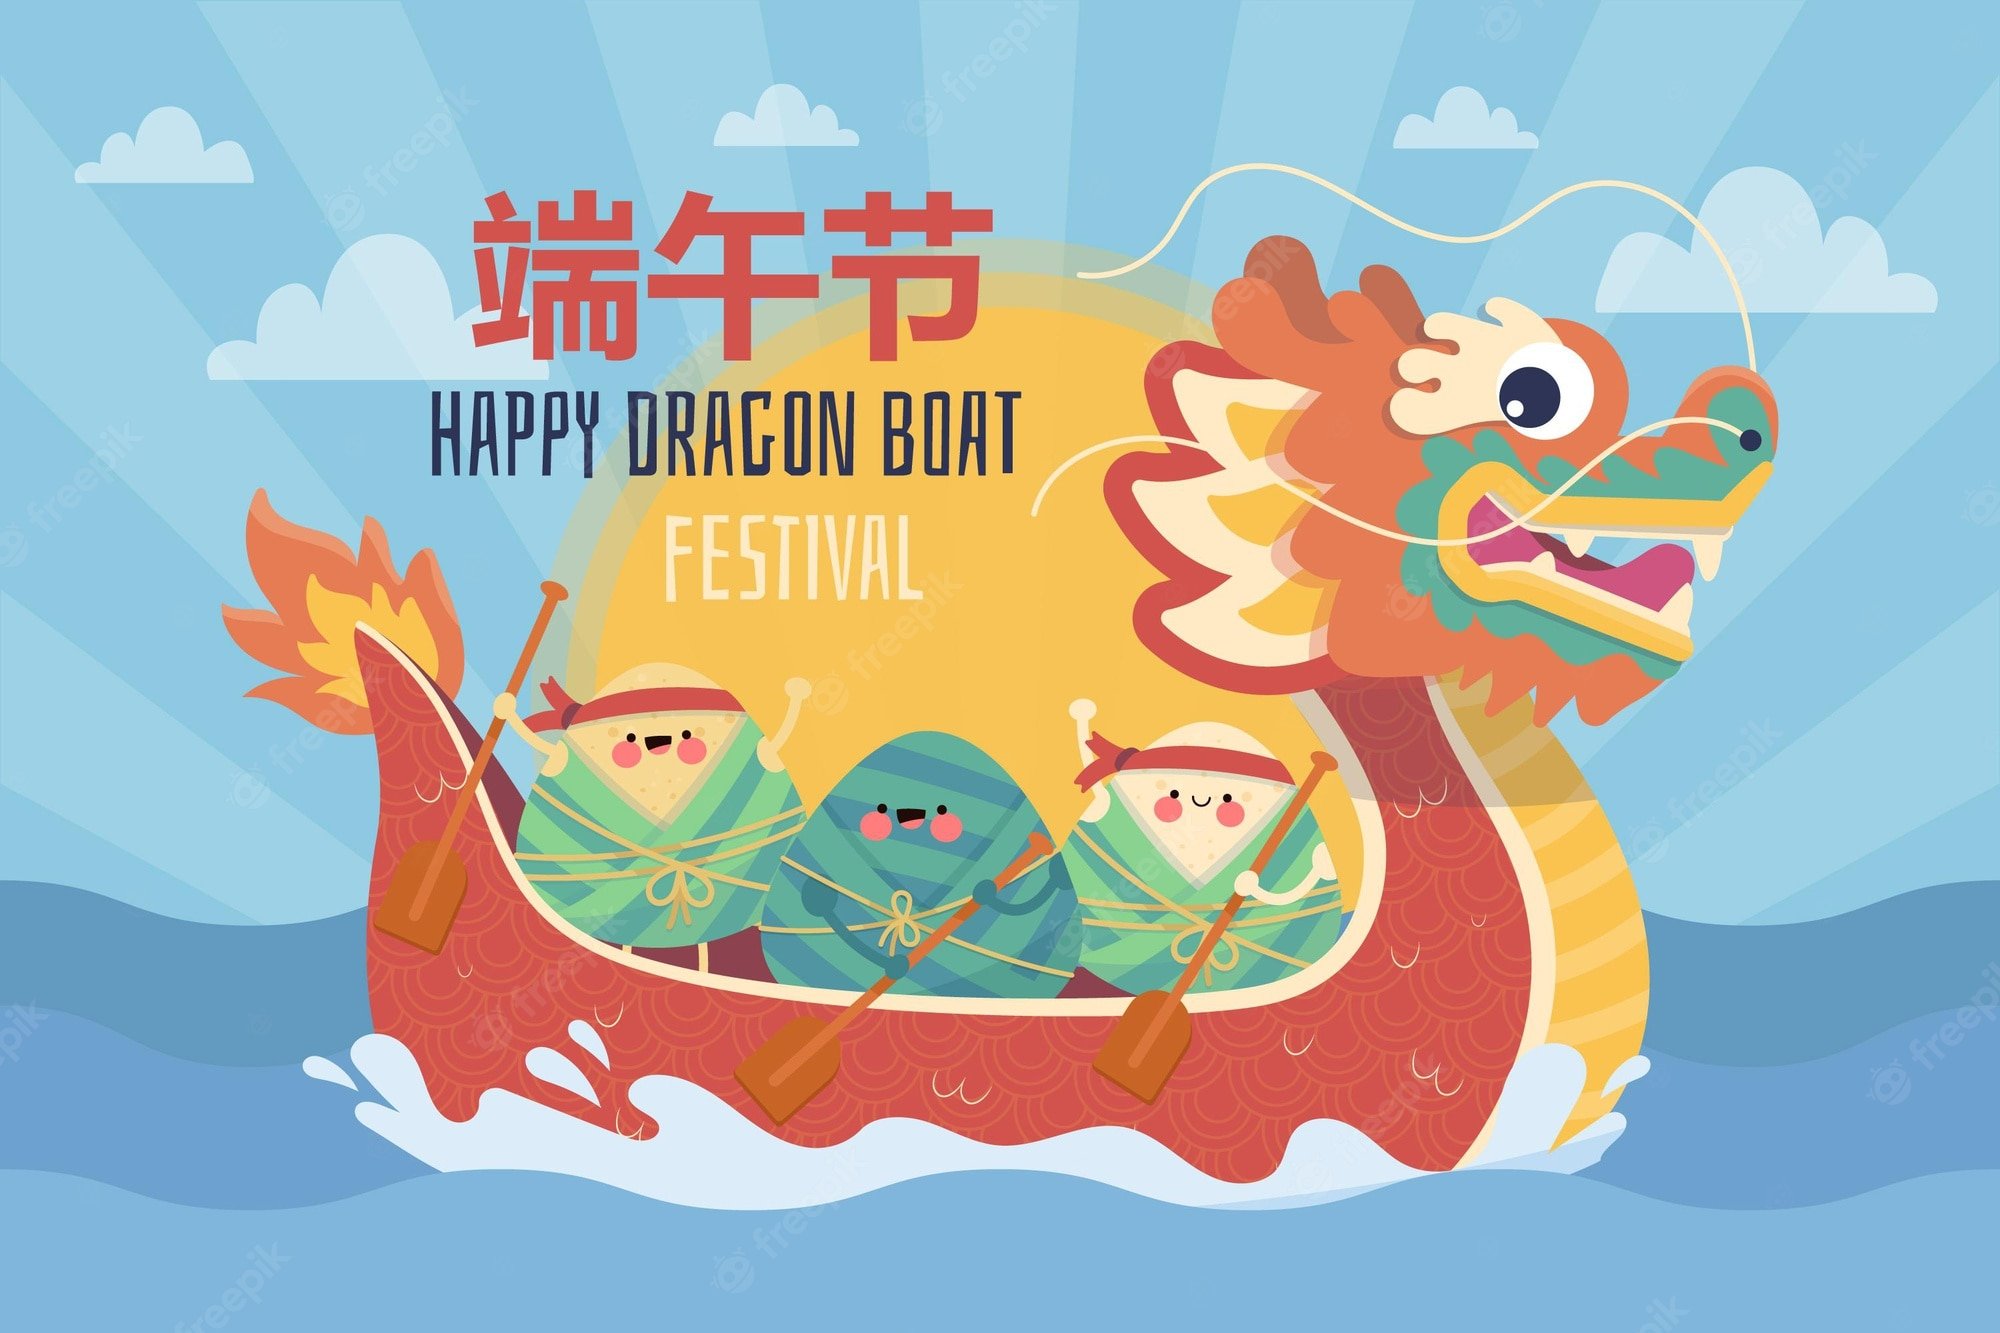 Dragon Boat Festival Chinese Image. Free Vectors, & PSD